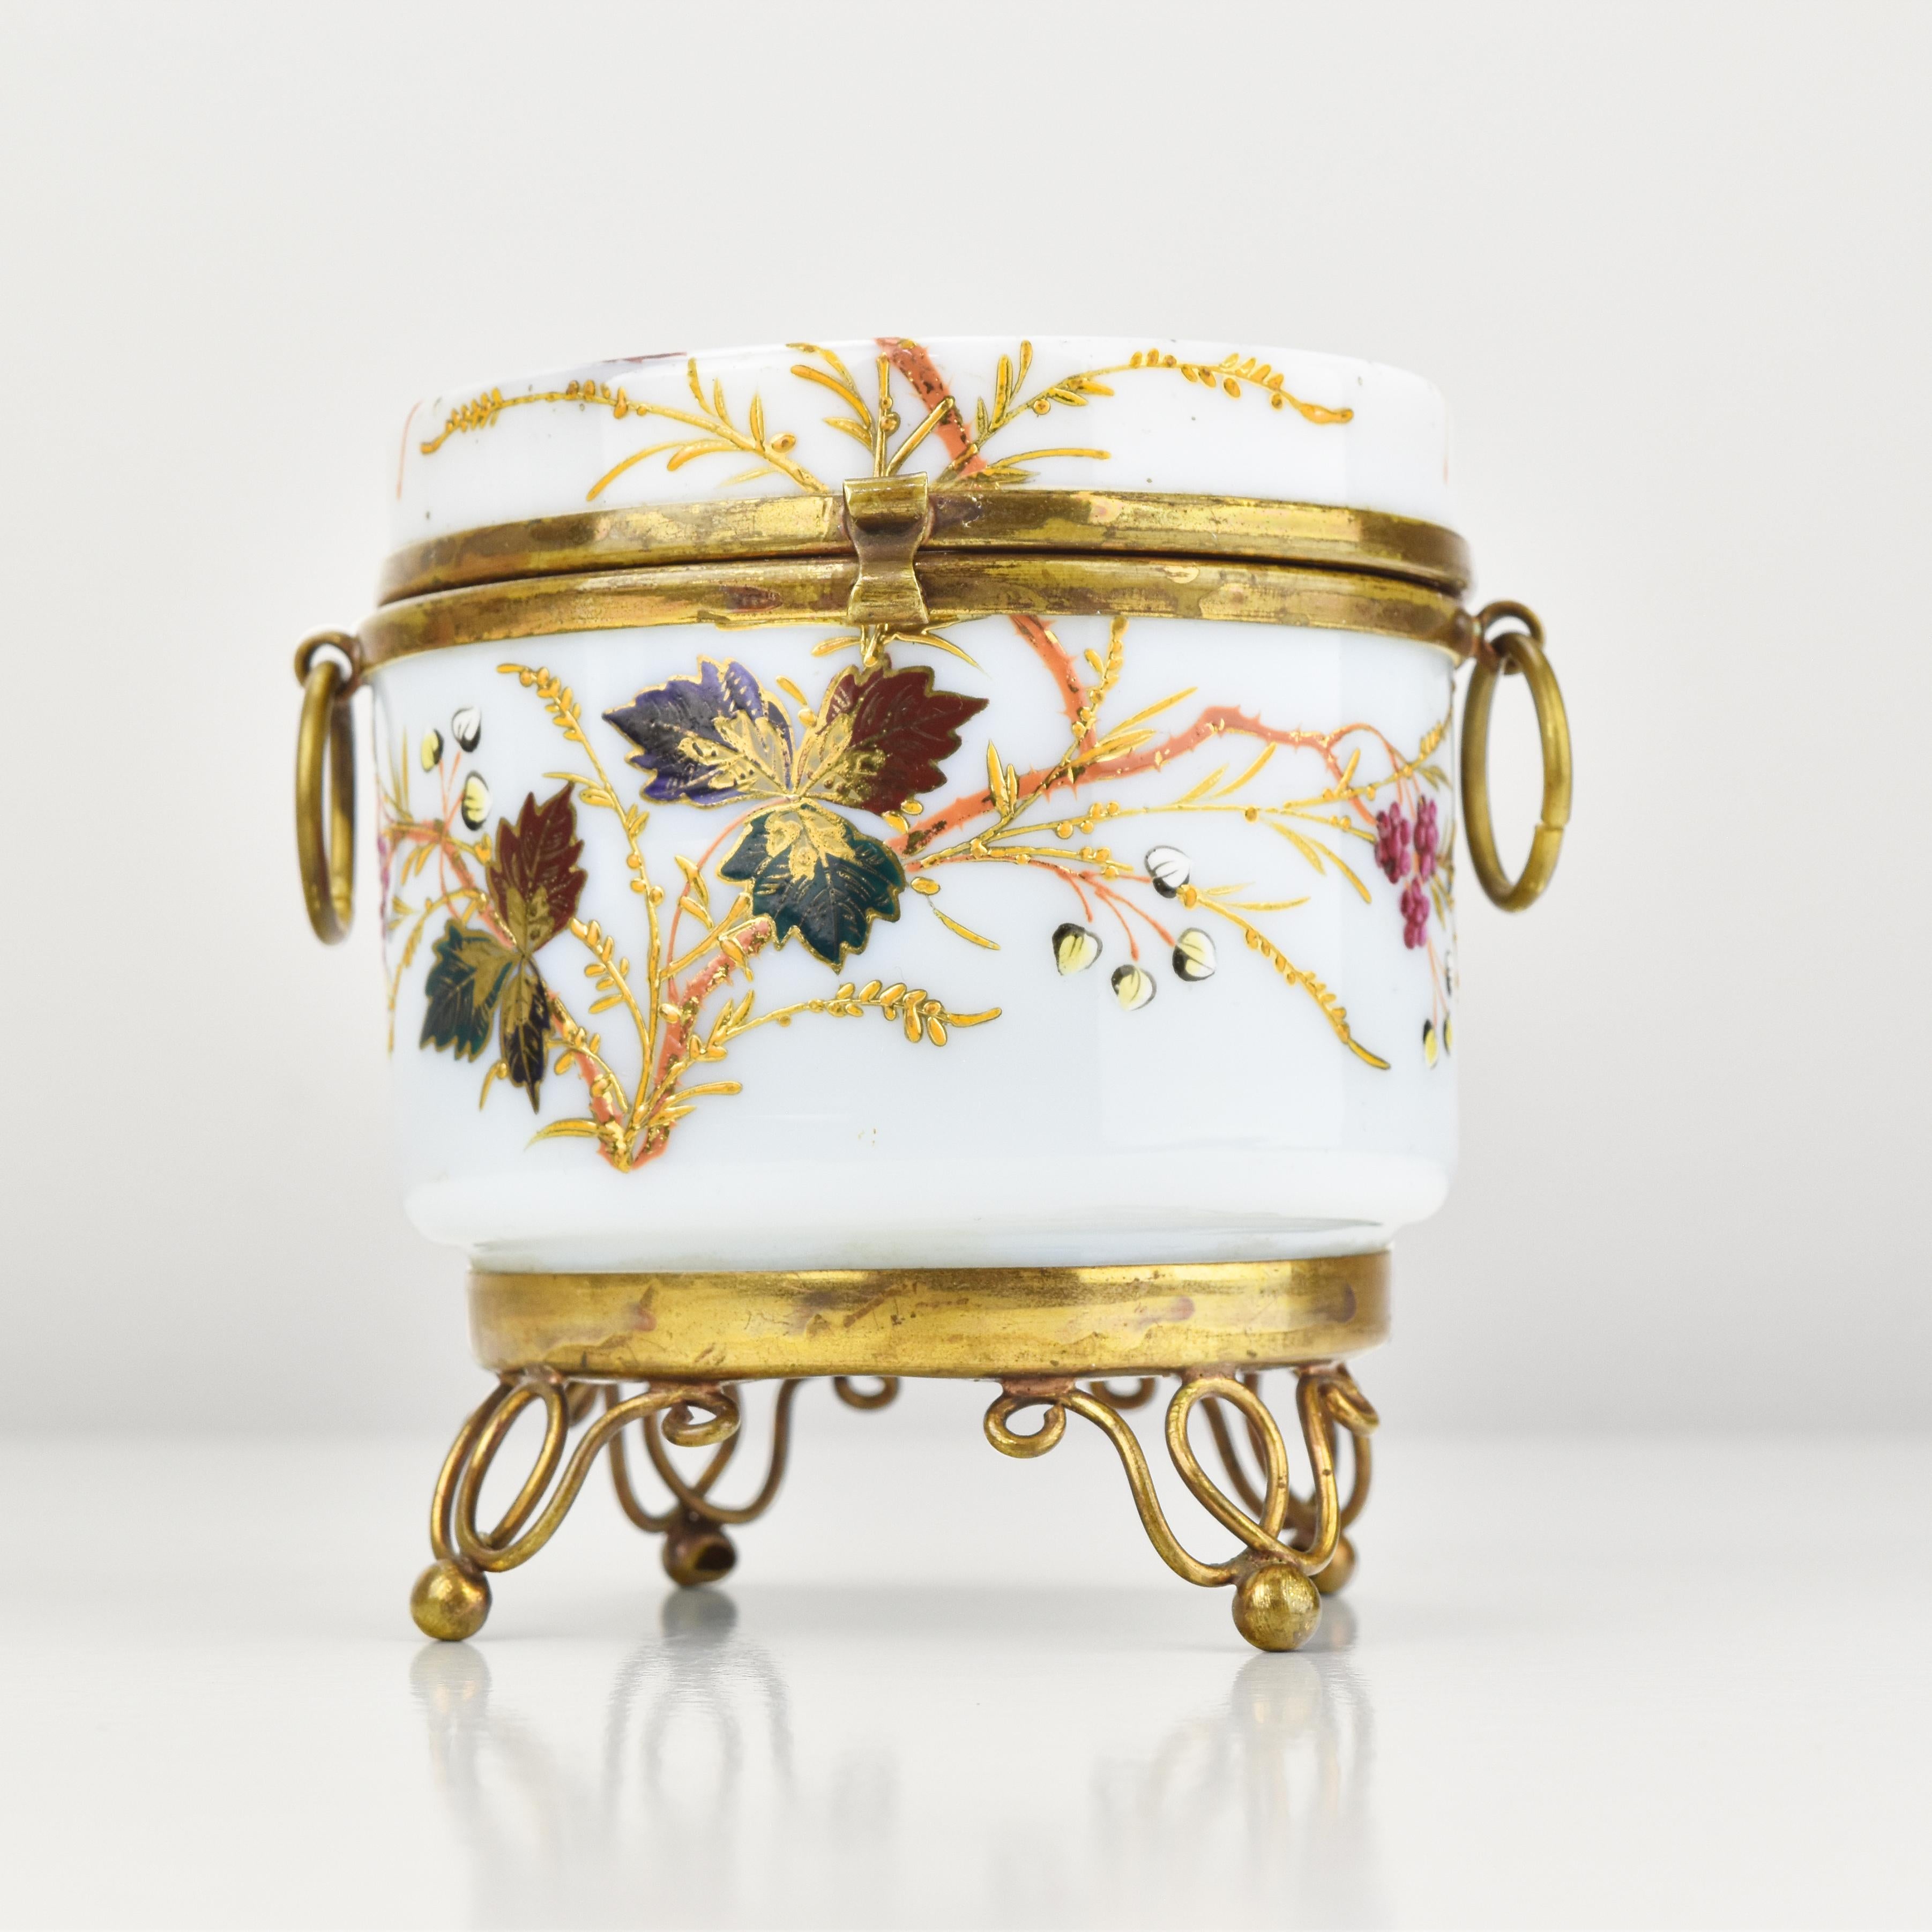 This antique Victorian opaline glass jewelry casket is a true testament to the opulence and elegance of the era.

The pièce de résistance is undoubtedly its exquisite floral enamel painting, which graces the surface with intricate artistry and